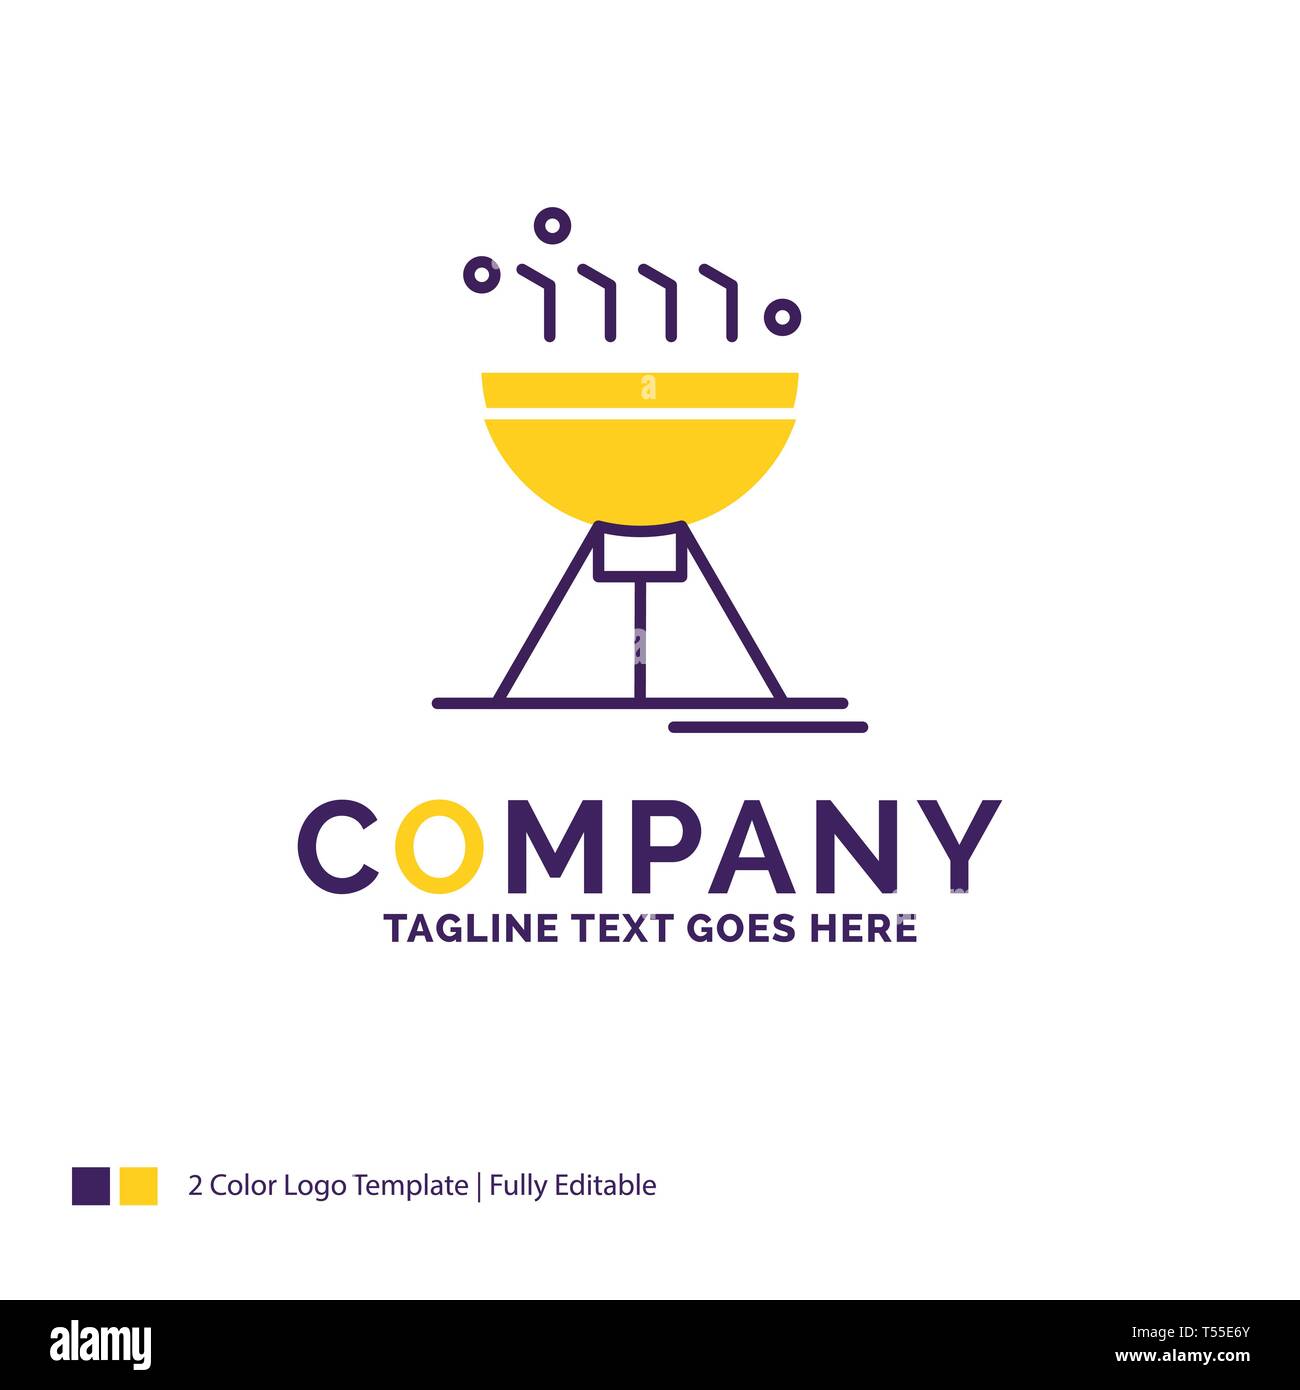 Company Name Logo Design For Cooking q Camping Food Grill Purple And Yellow Brand Name Design With Place For line Creative Logo Template For Stock Vector Image Art Alamy